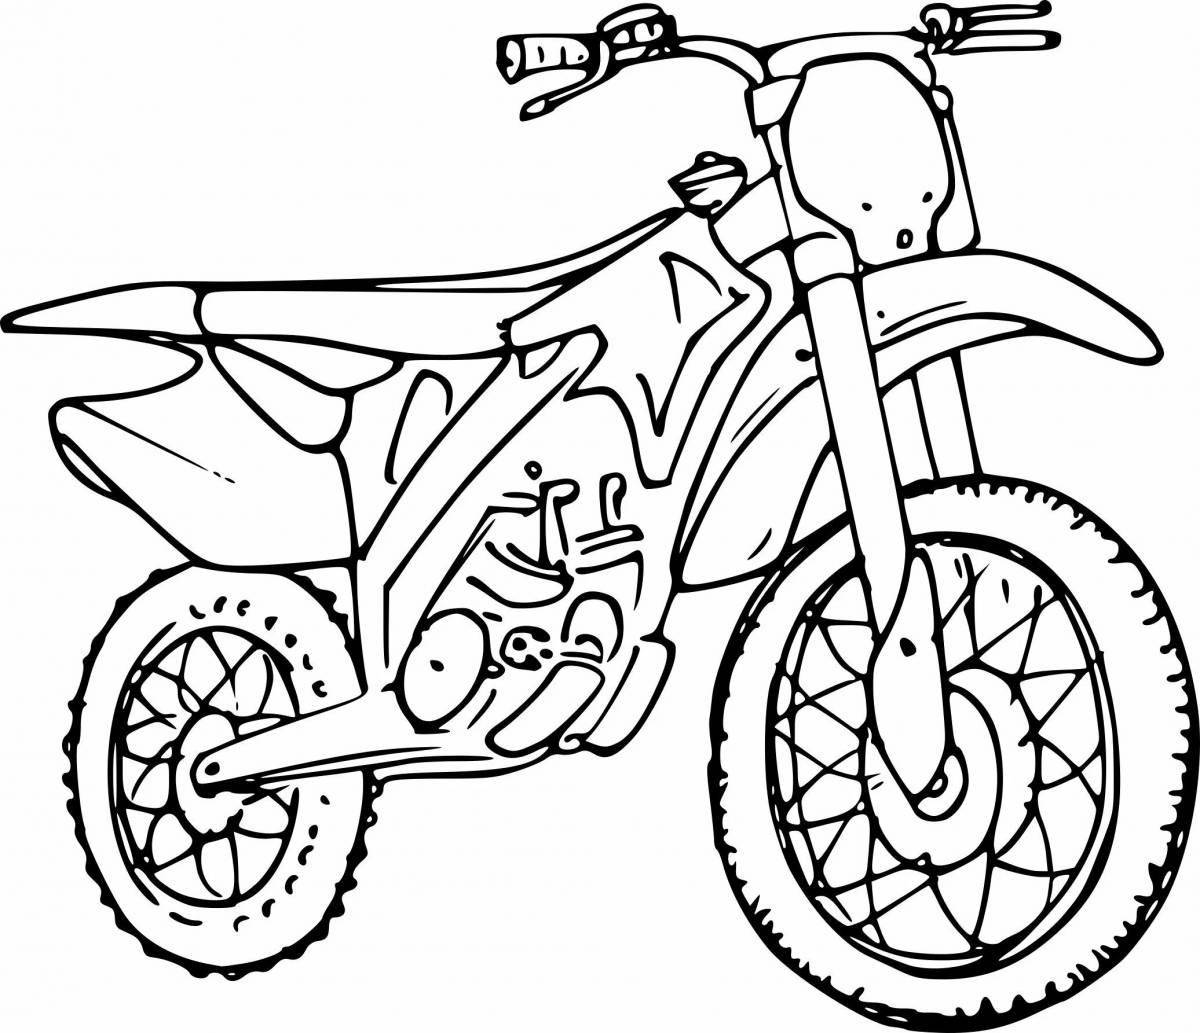 Amazing motorcycle coloring page for 7 year olds